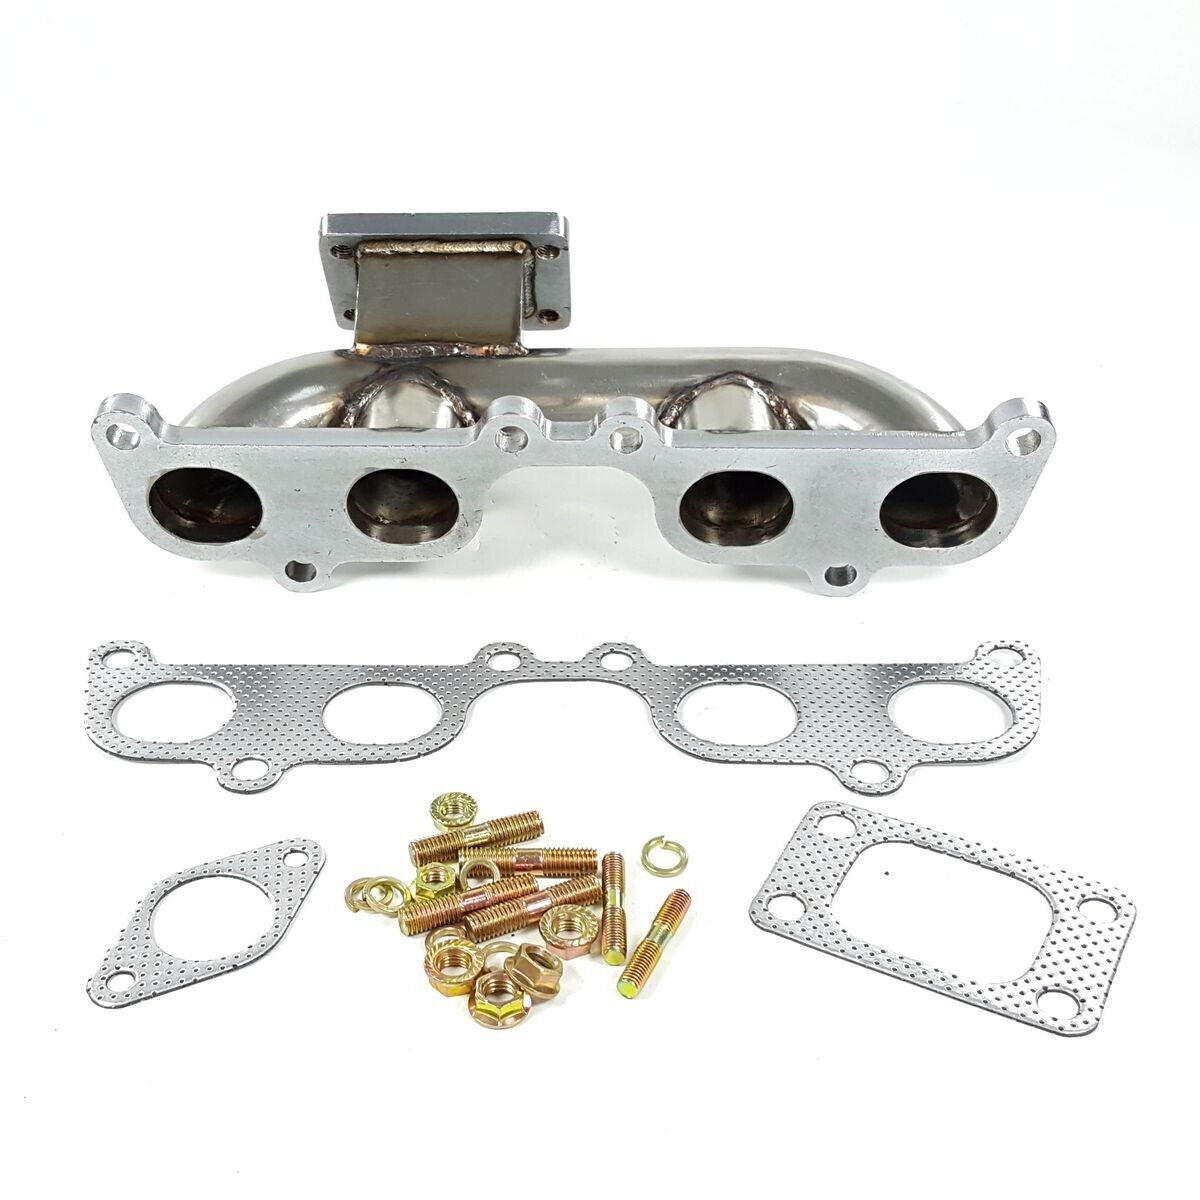 FIT Toyota Tacoma Hilux 4Runner 2RZ-FE 3RZ-FE Stainless Turbo T3 Manifold Header